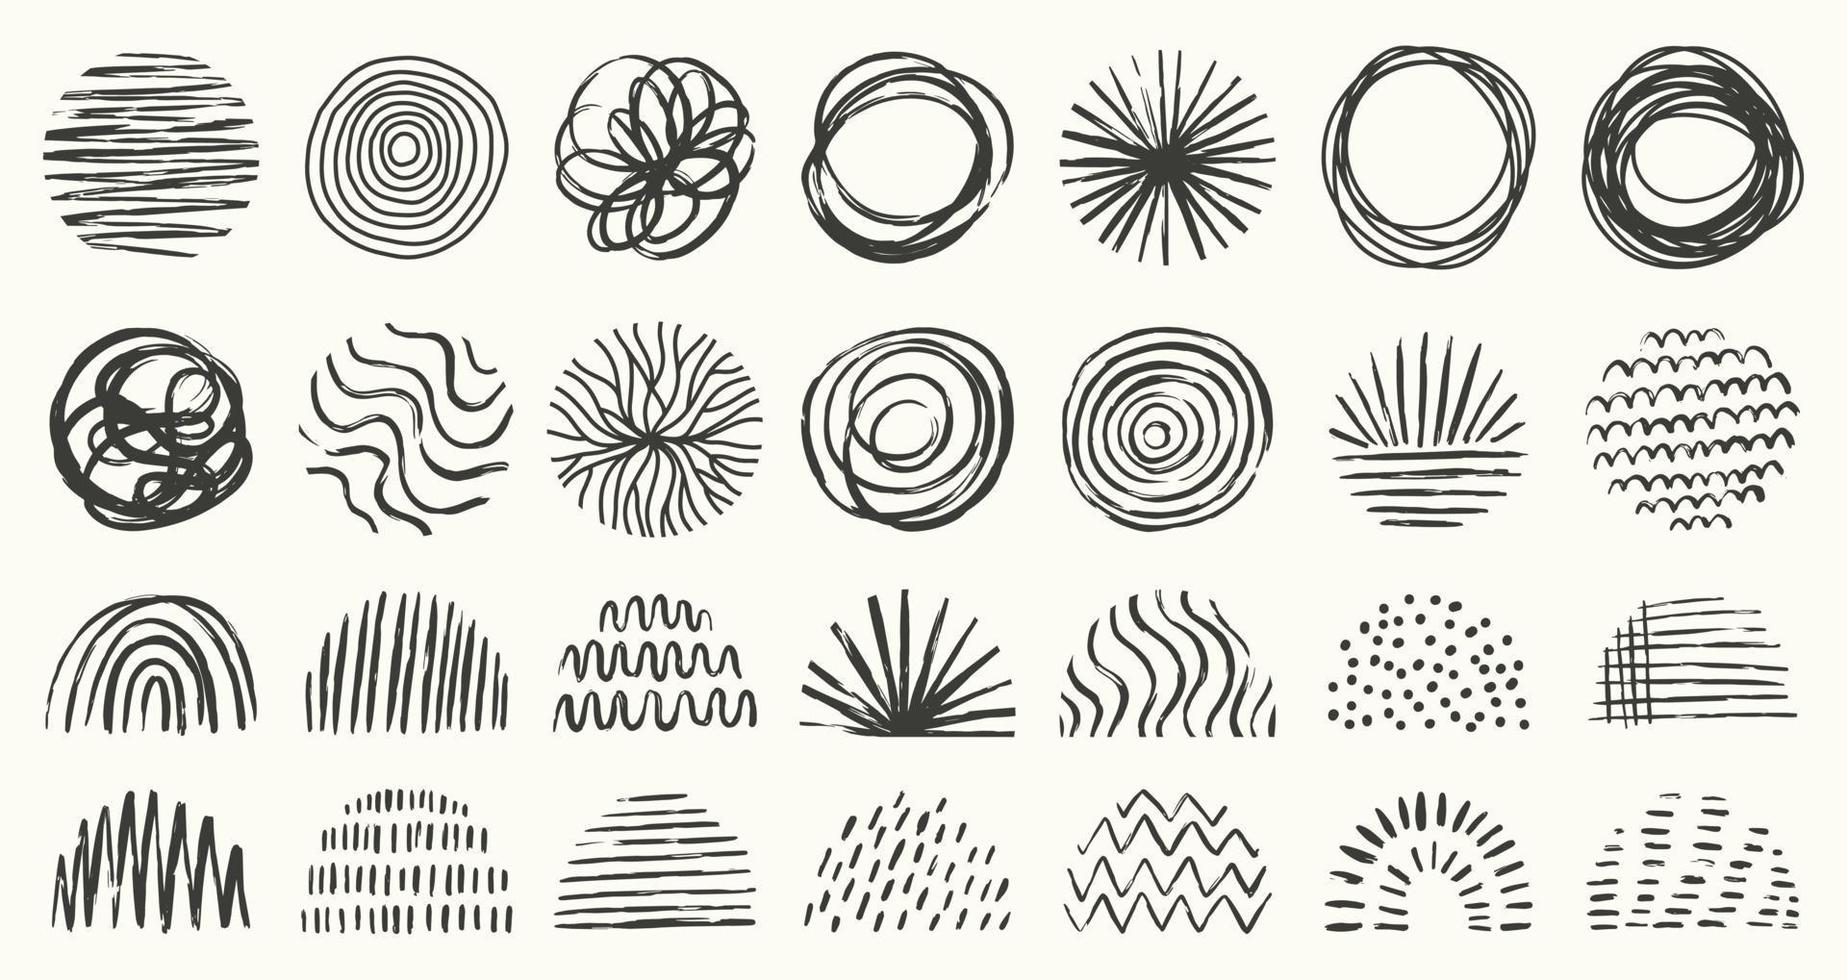 Set of round and semicircle abstract backgrounds or Patterns. Hand drawn doodle shapes. Spots, drops, curves, Lines. Contemporary modern trendy Vector illustration.